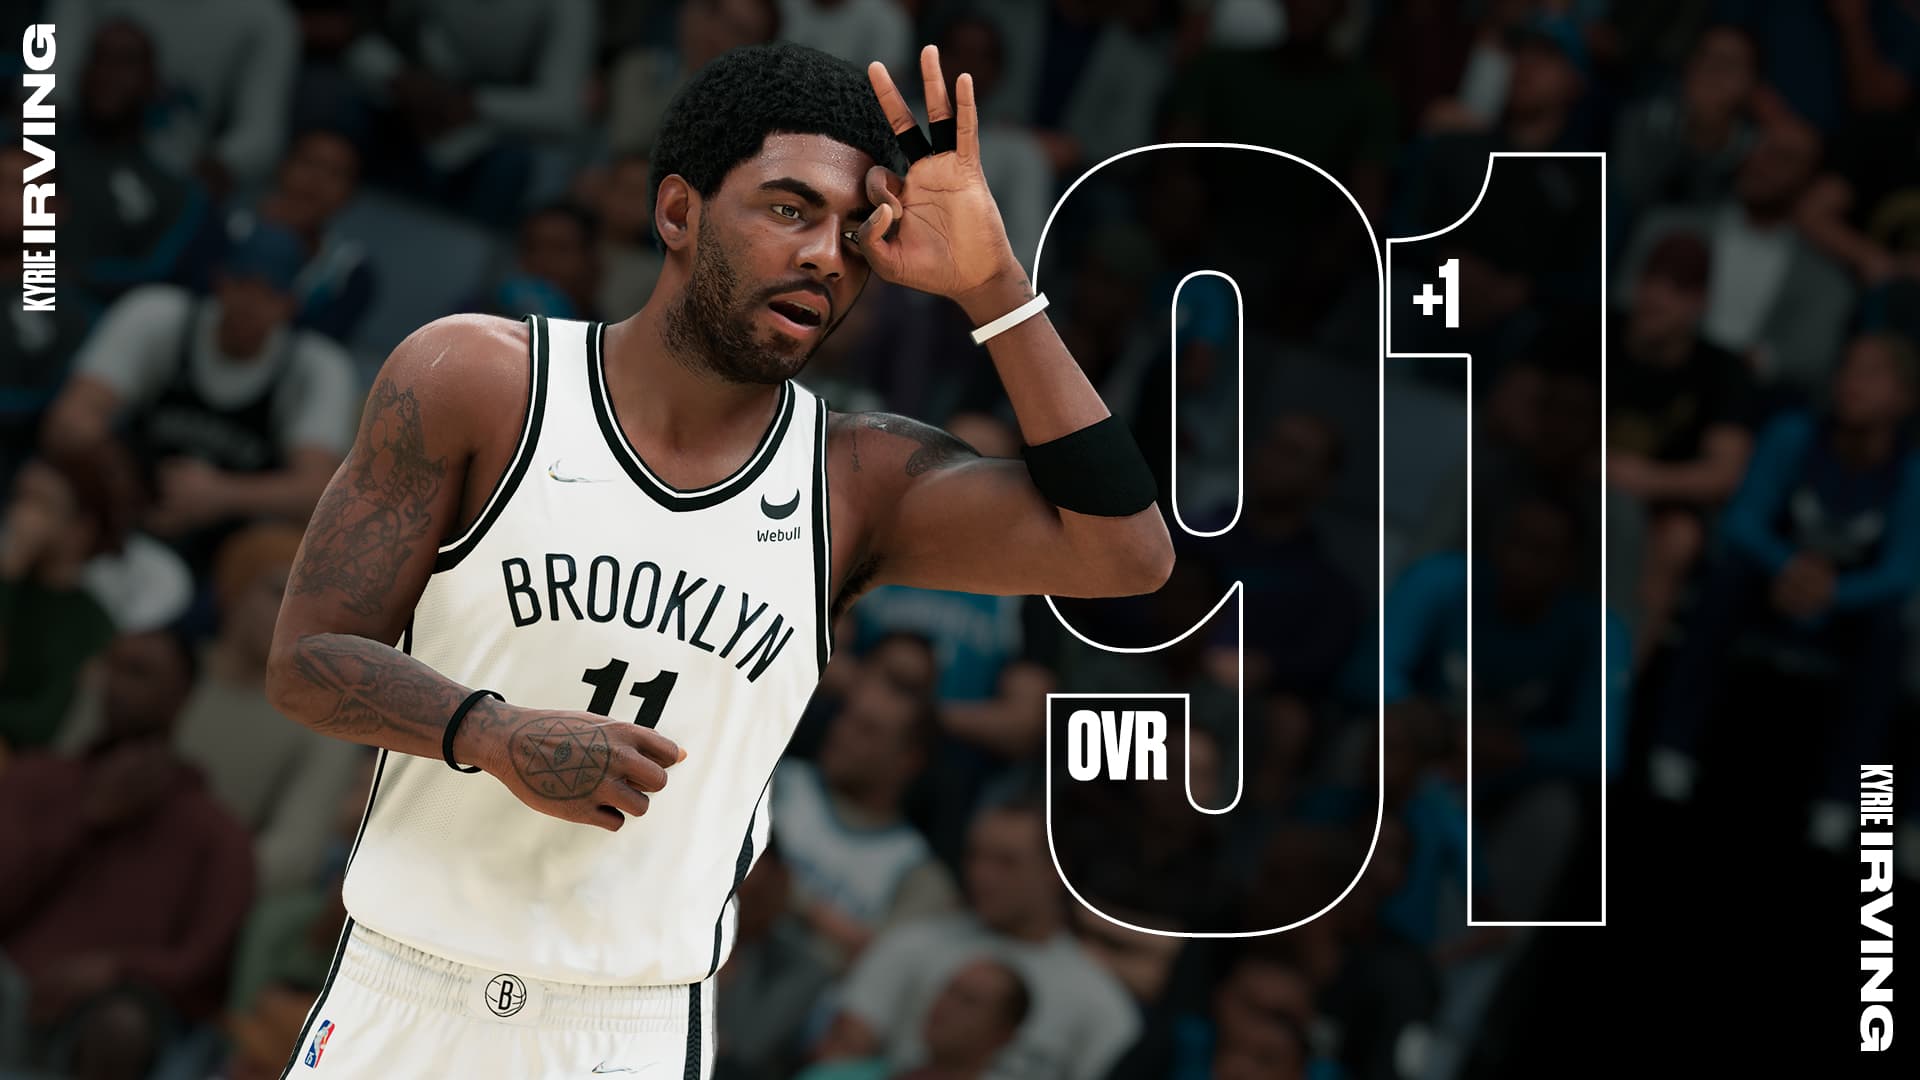 KYRIE IRVING RATING